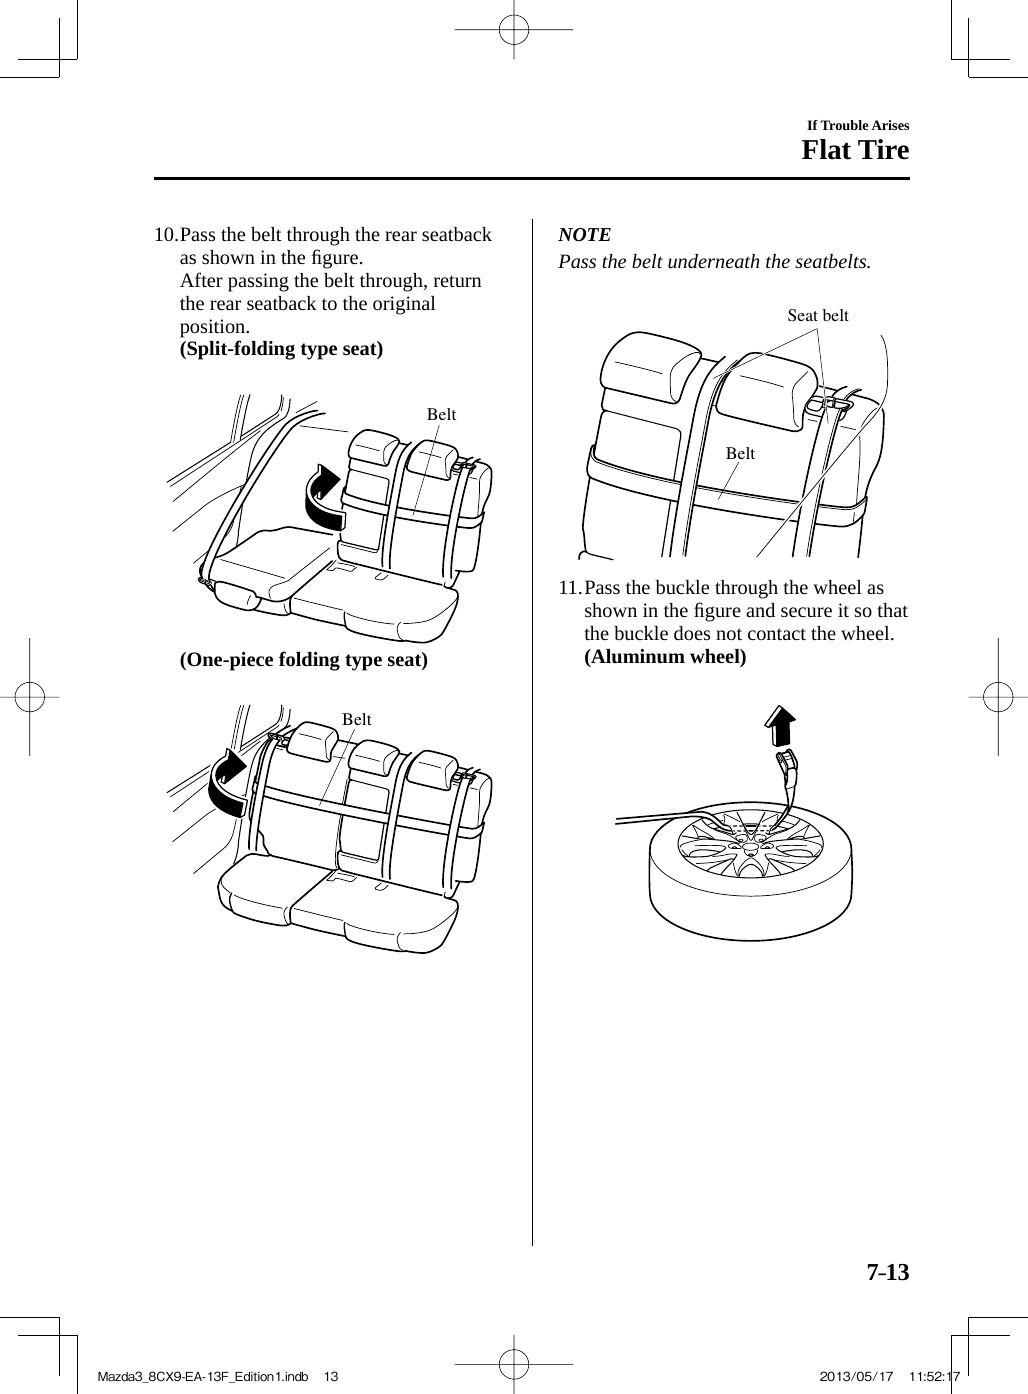 7–13If Trouble ArisesFlat Tire10.  Pass the belt through the rear seatback as shown in the ﬁ gure.    After passing the belt through, return the rear seatback to the original position.    (Split-folding type seat)    Belt     (One-piece folding type seat)    Belt   NOTE  Pass the belt underneath the seatbelts.   BeltSeat belt   11.  Pass the buckle through the wheel as shown in the ﬁ gure and secure it so that the buckle does not contact the wheel.    (Aluminum wheel)     Mazda3_8CX9-EA-13F_Edition1.indb   13Mazda3_8CX9-EA-13F_Edition1.indb   13 2013/05/17   11:52:172013/05/17   11:52:17